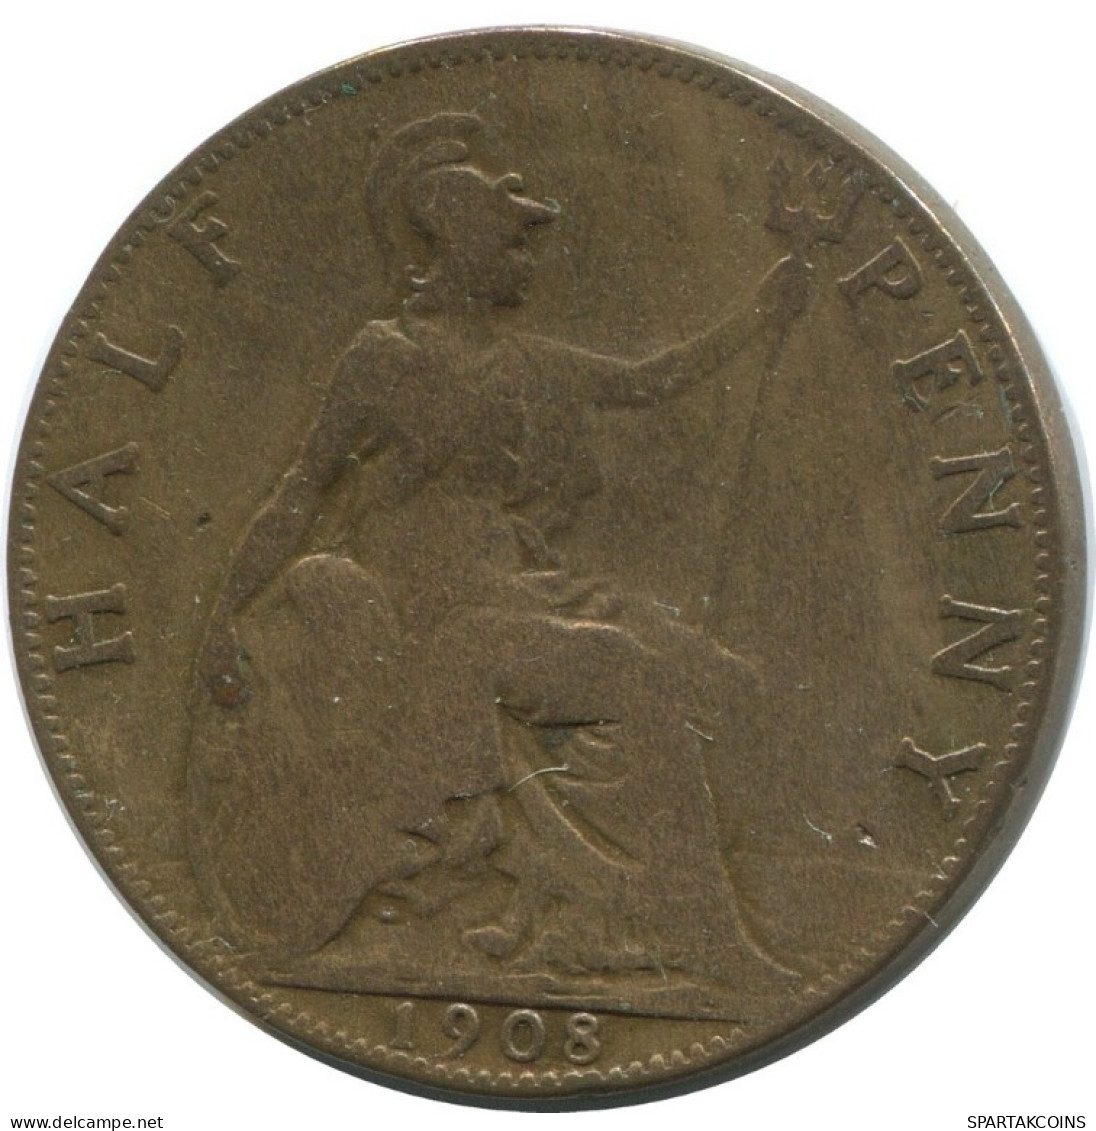 HALF PENNY 1908 UK GREAT BRITAIN Coin #AG789.1.U.A - C. 1/2 Penny